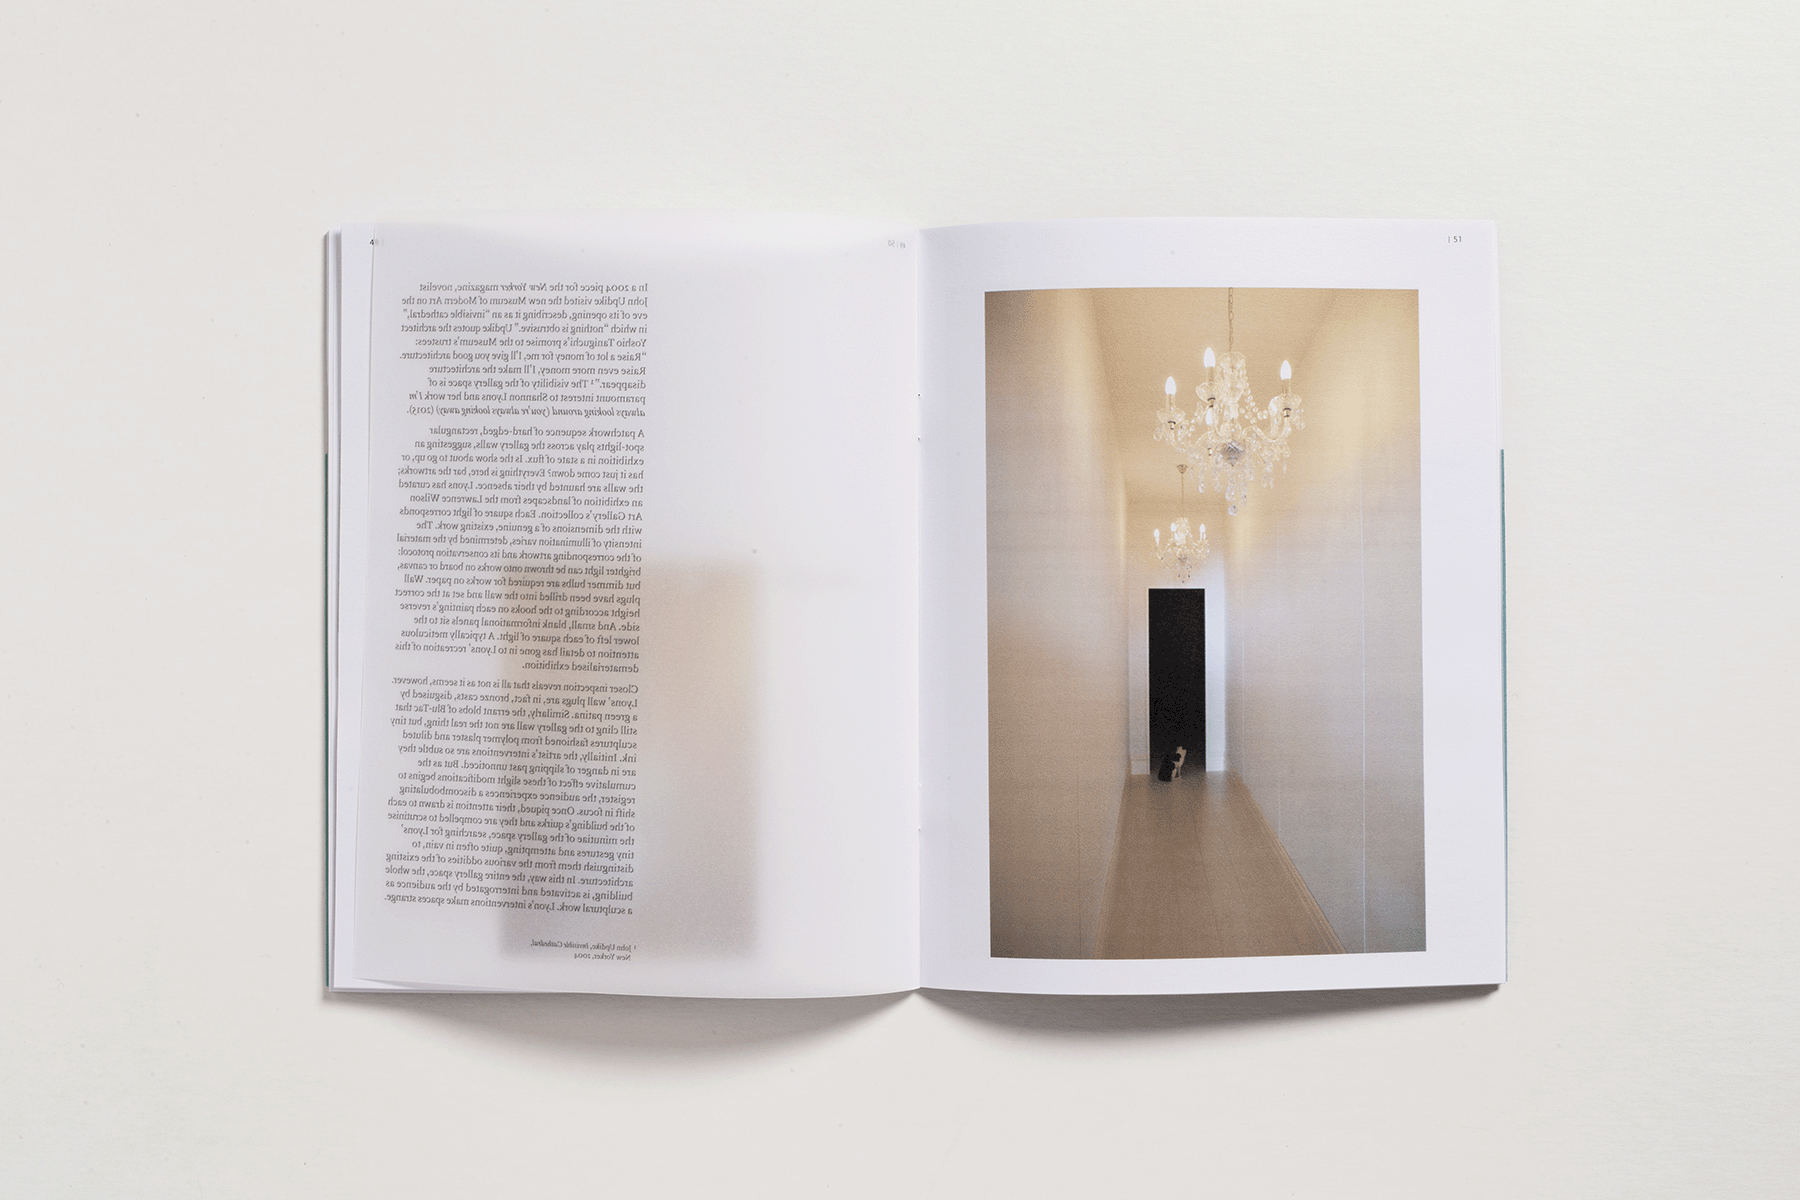 Editorial Design for an art catalogue in Stendal Germany